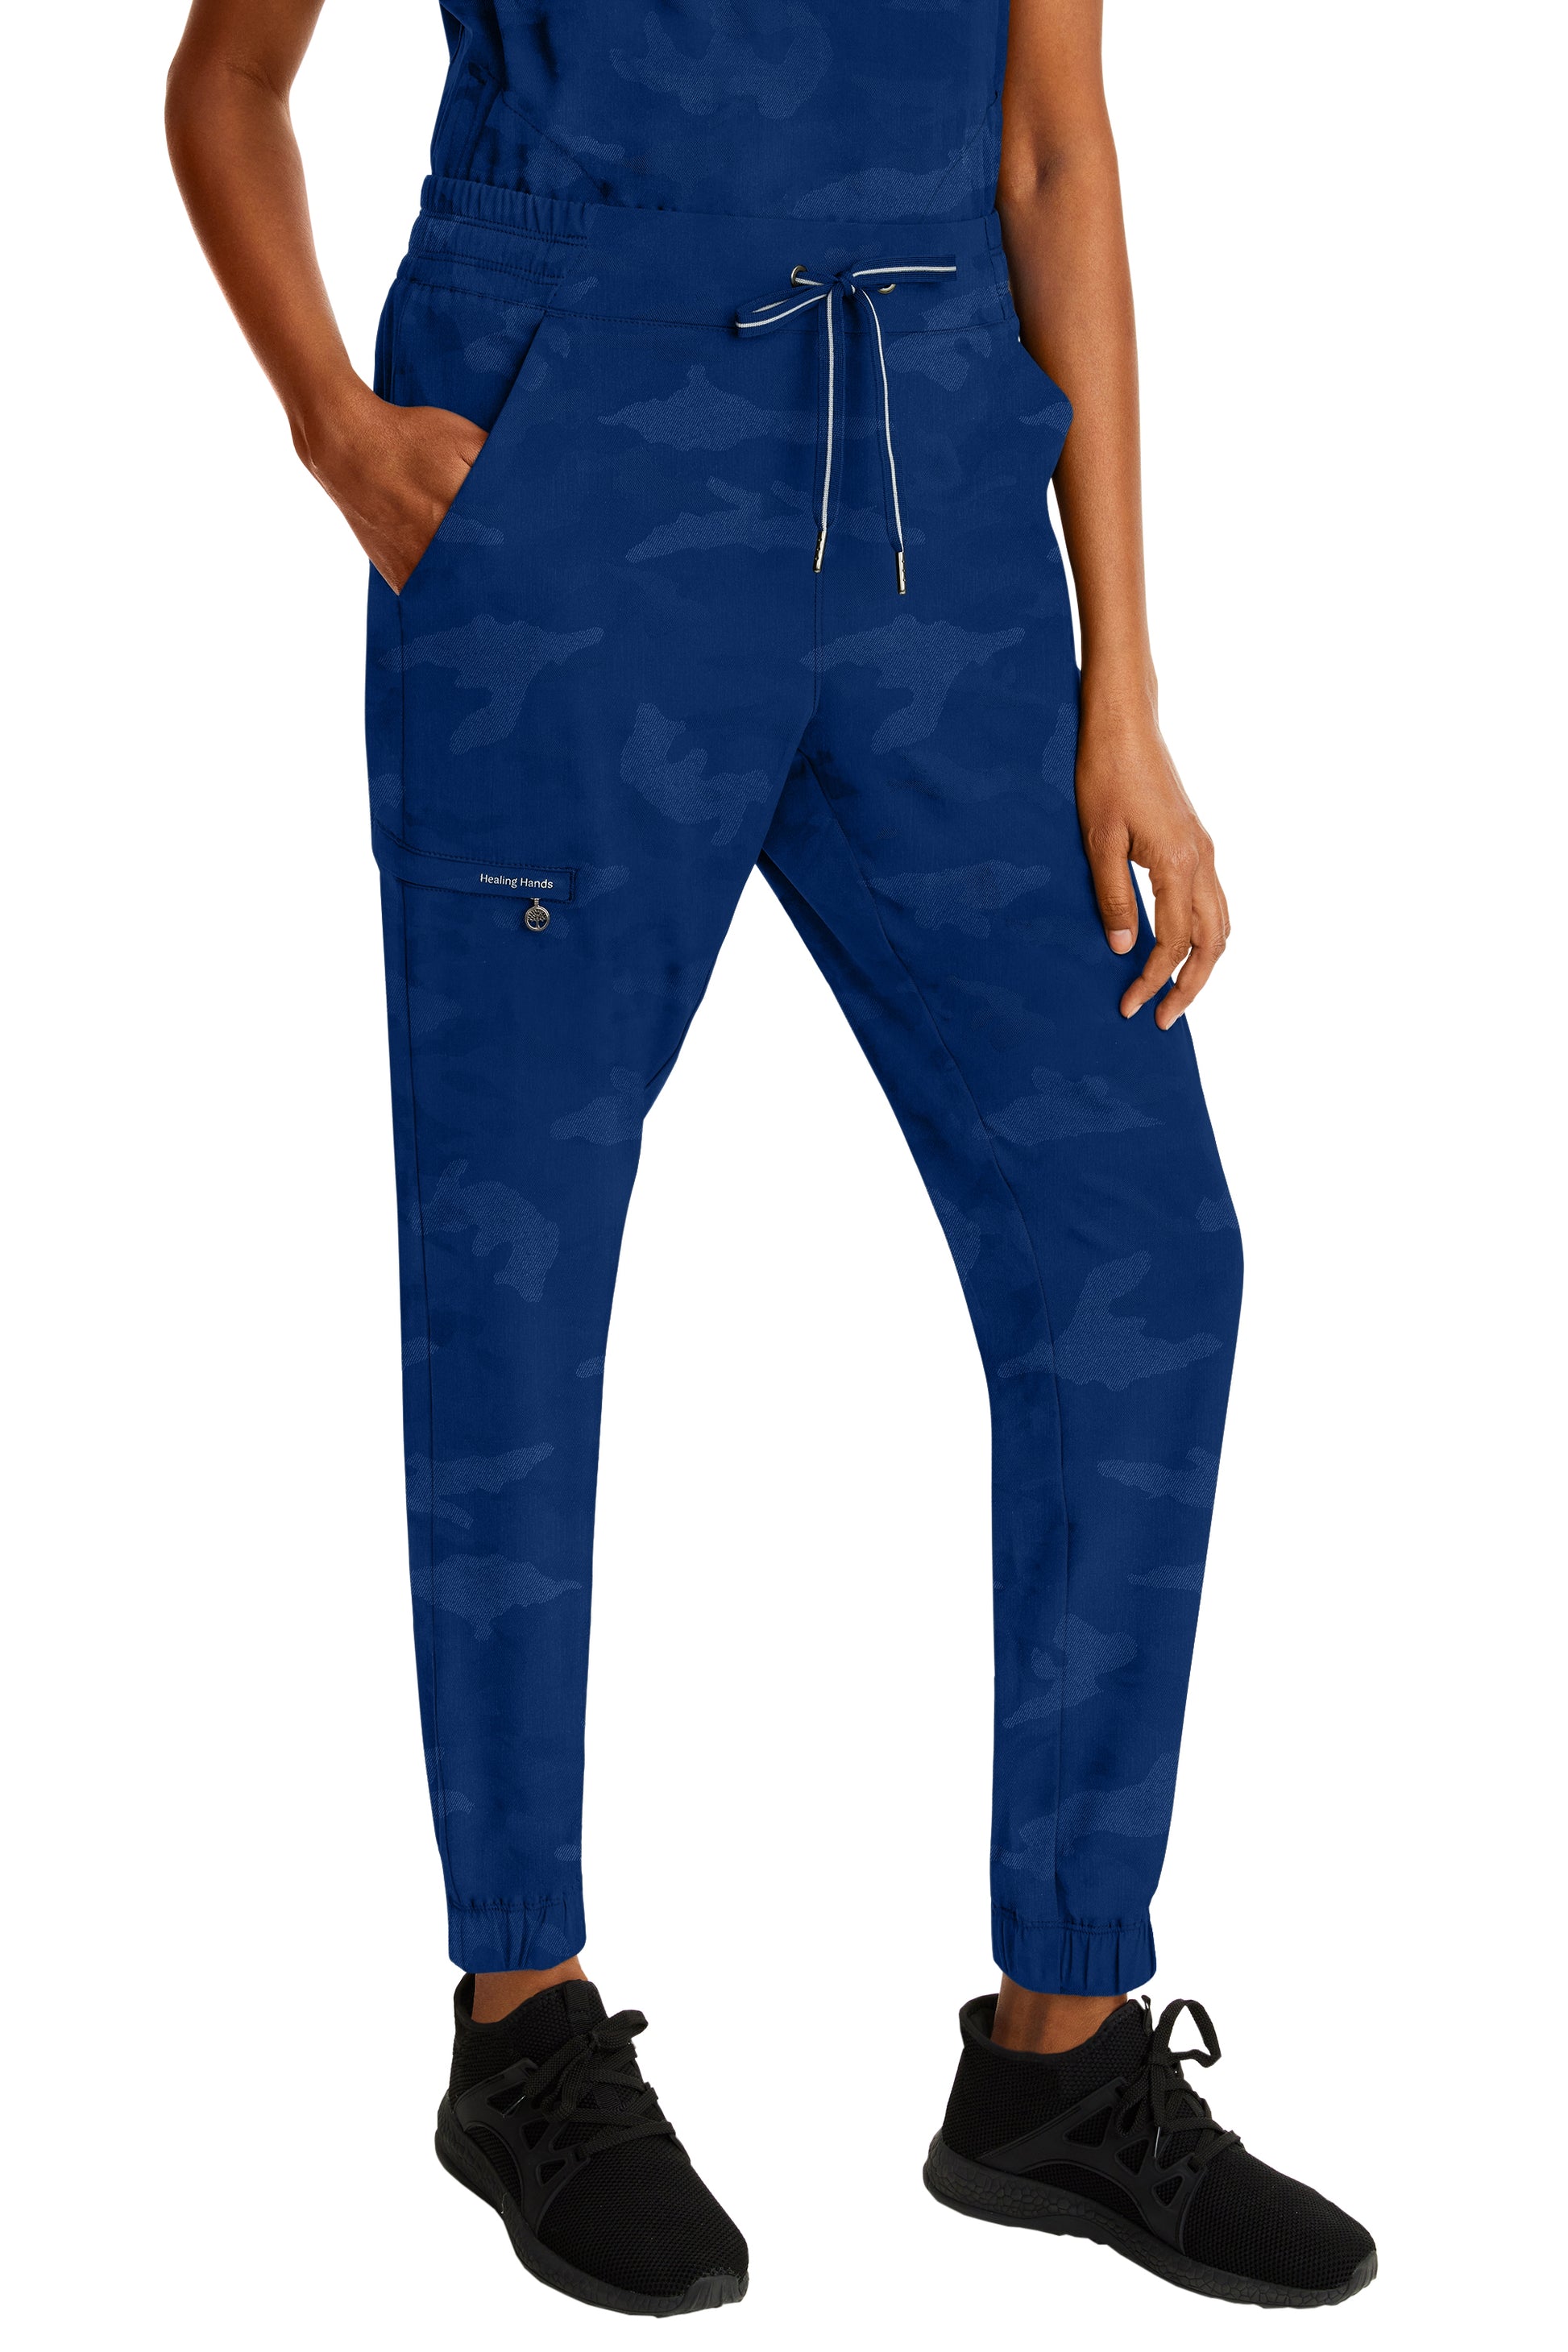 Covalent Activewear Joggers 5087 MED BLK - Applause Dancewear and Designs